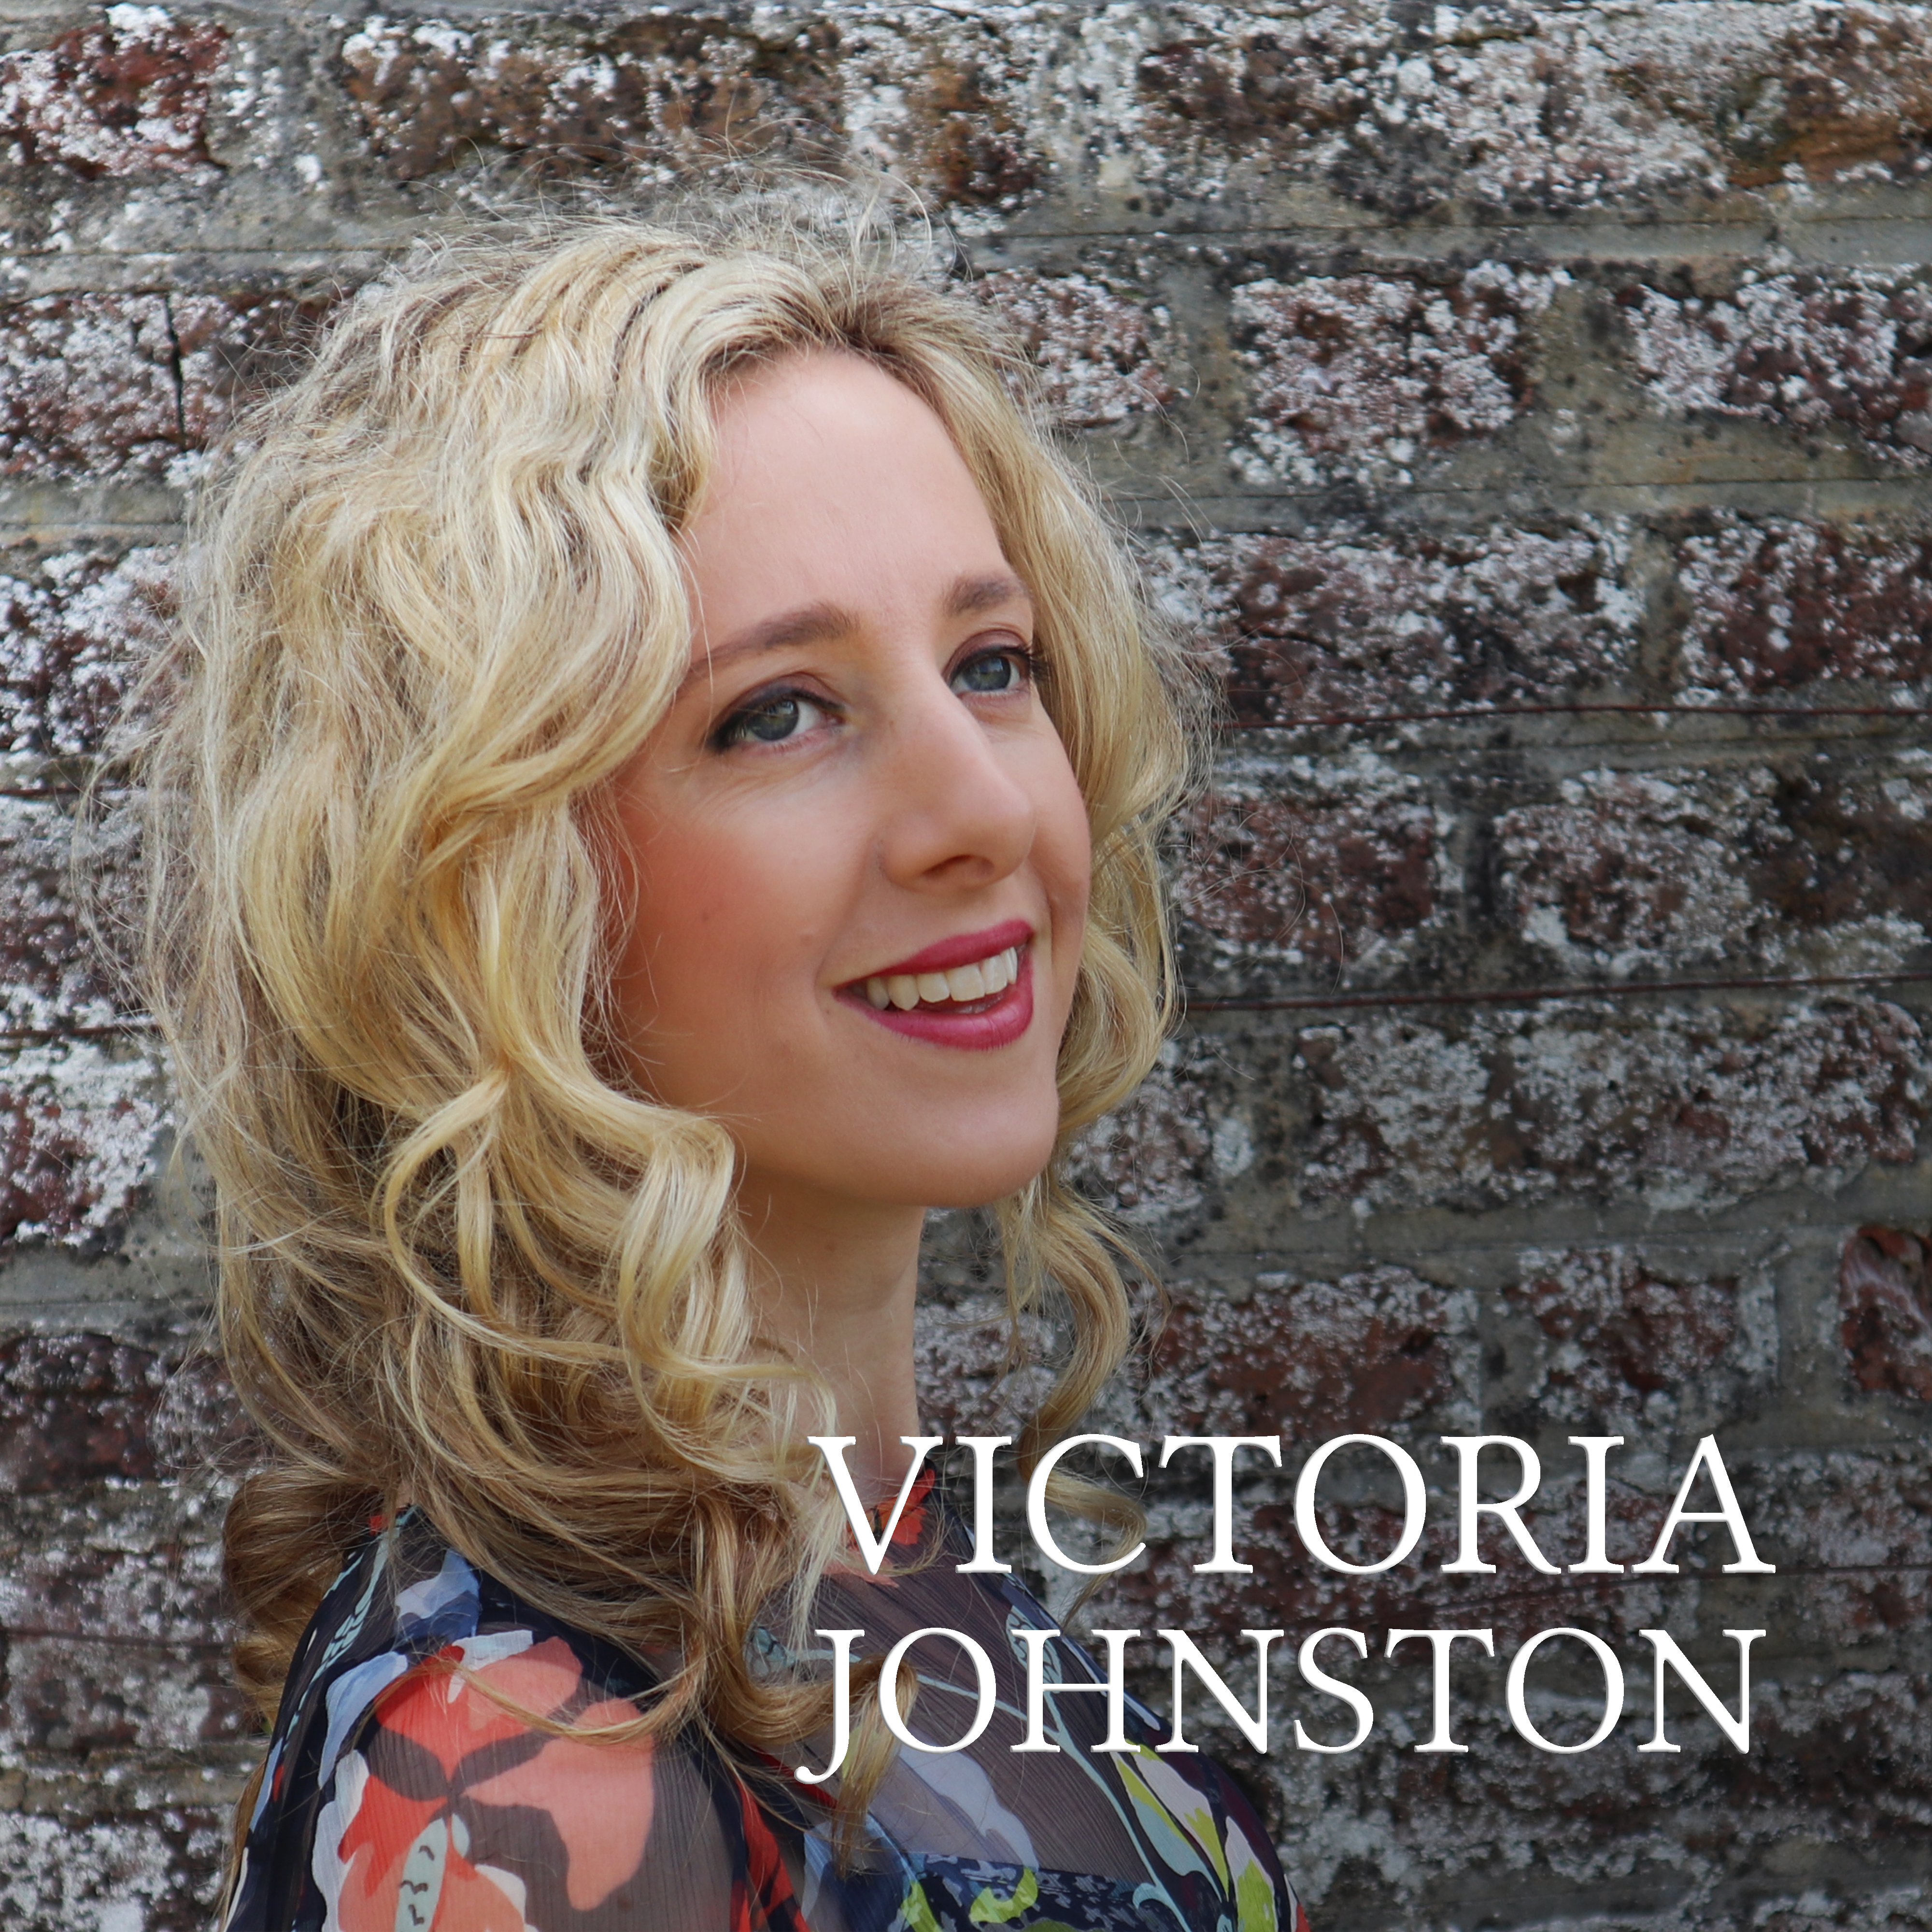 TAR LIOM and YOU ARE THE PEACE, the double number ones from VICTORIA JOHNSTON, are out now.